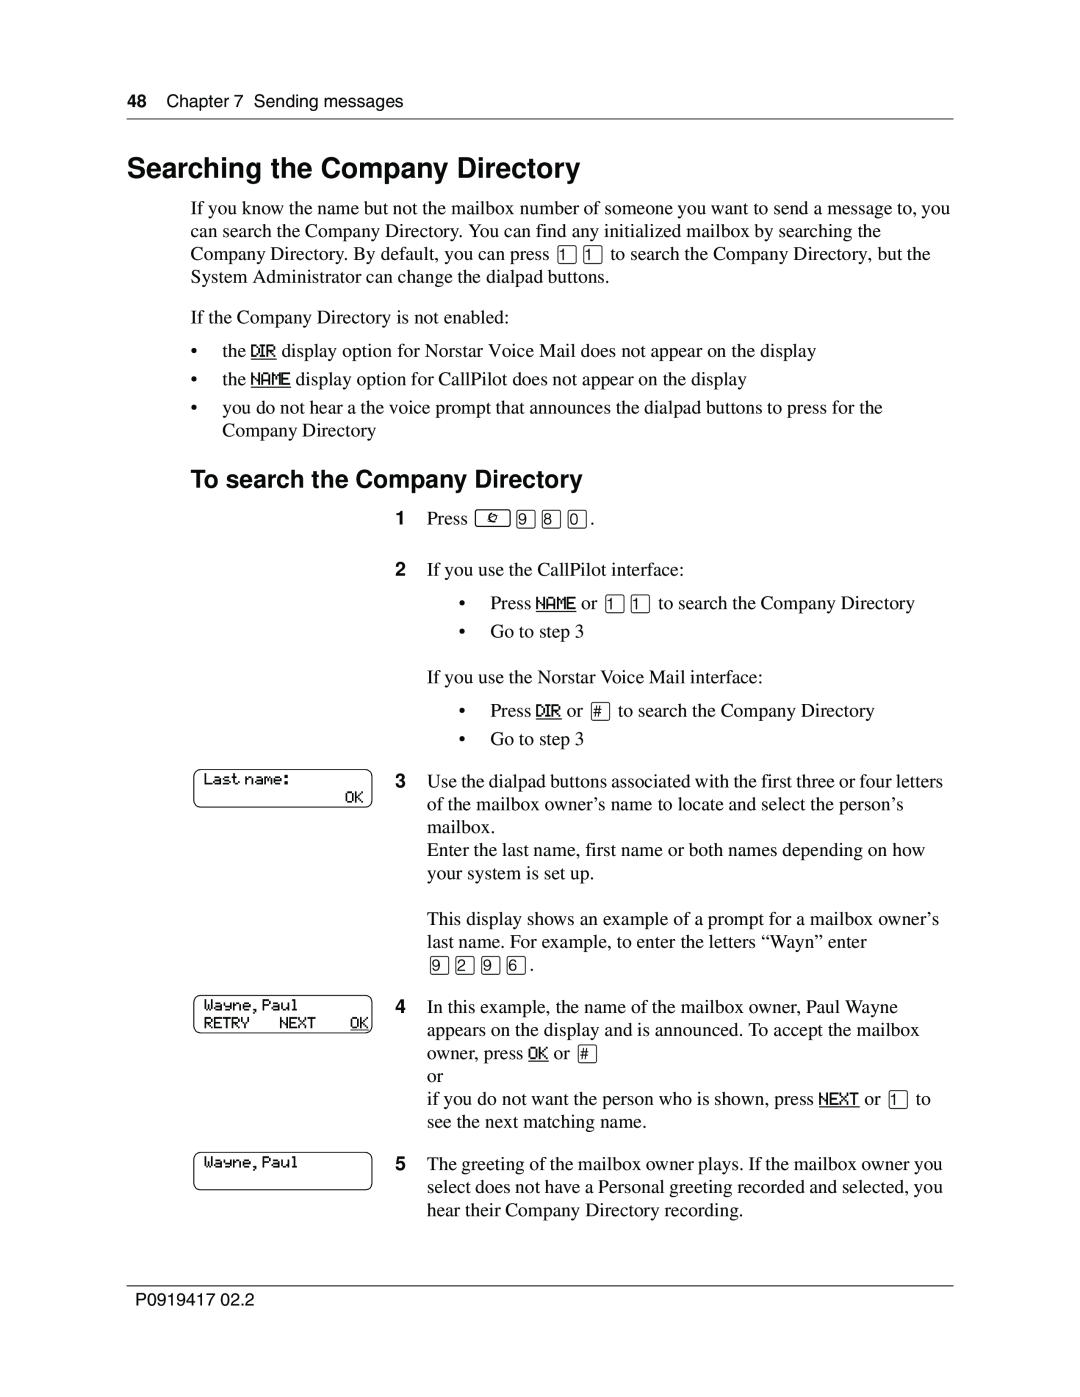 Nortel Networks CallPilot manual Searching the Company Directory, To search the Company Directory 